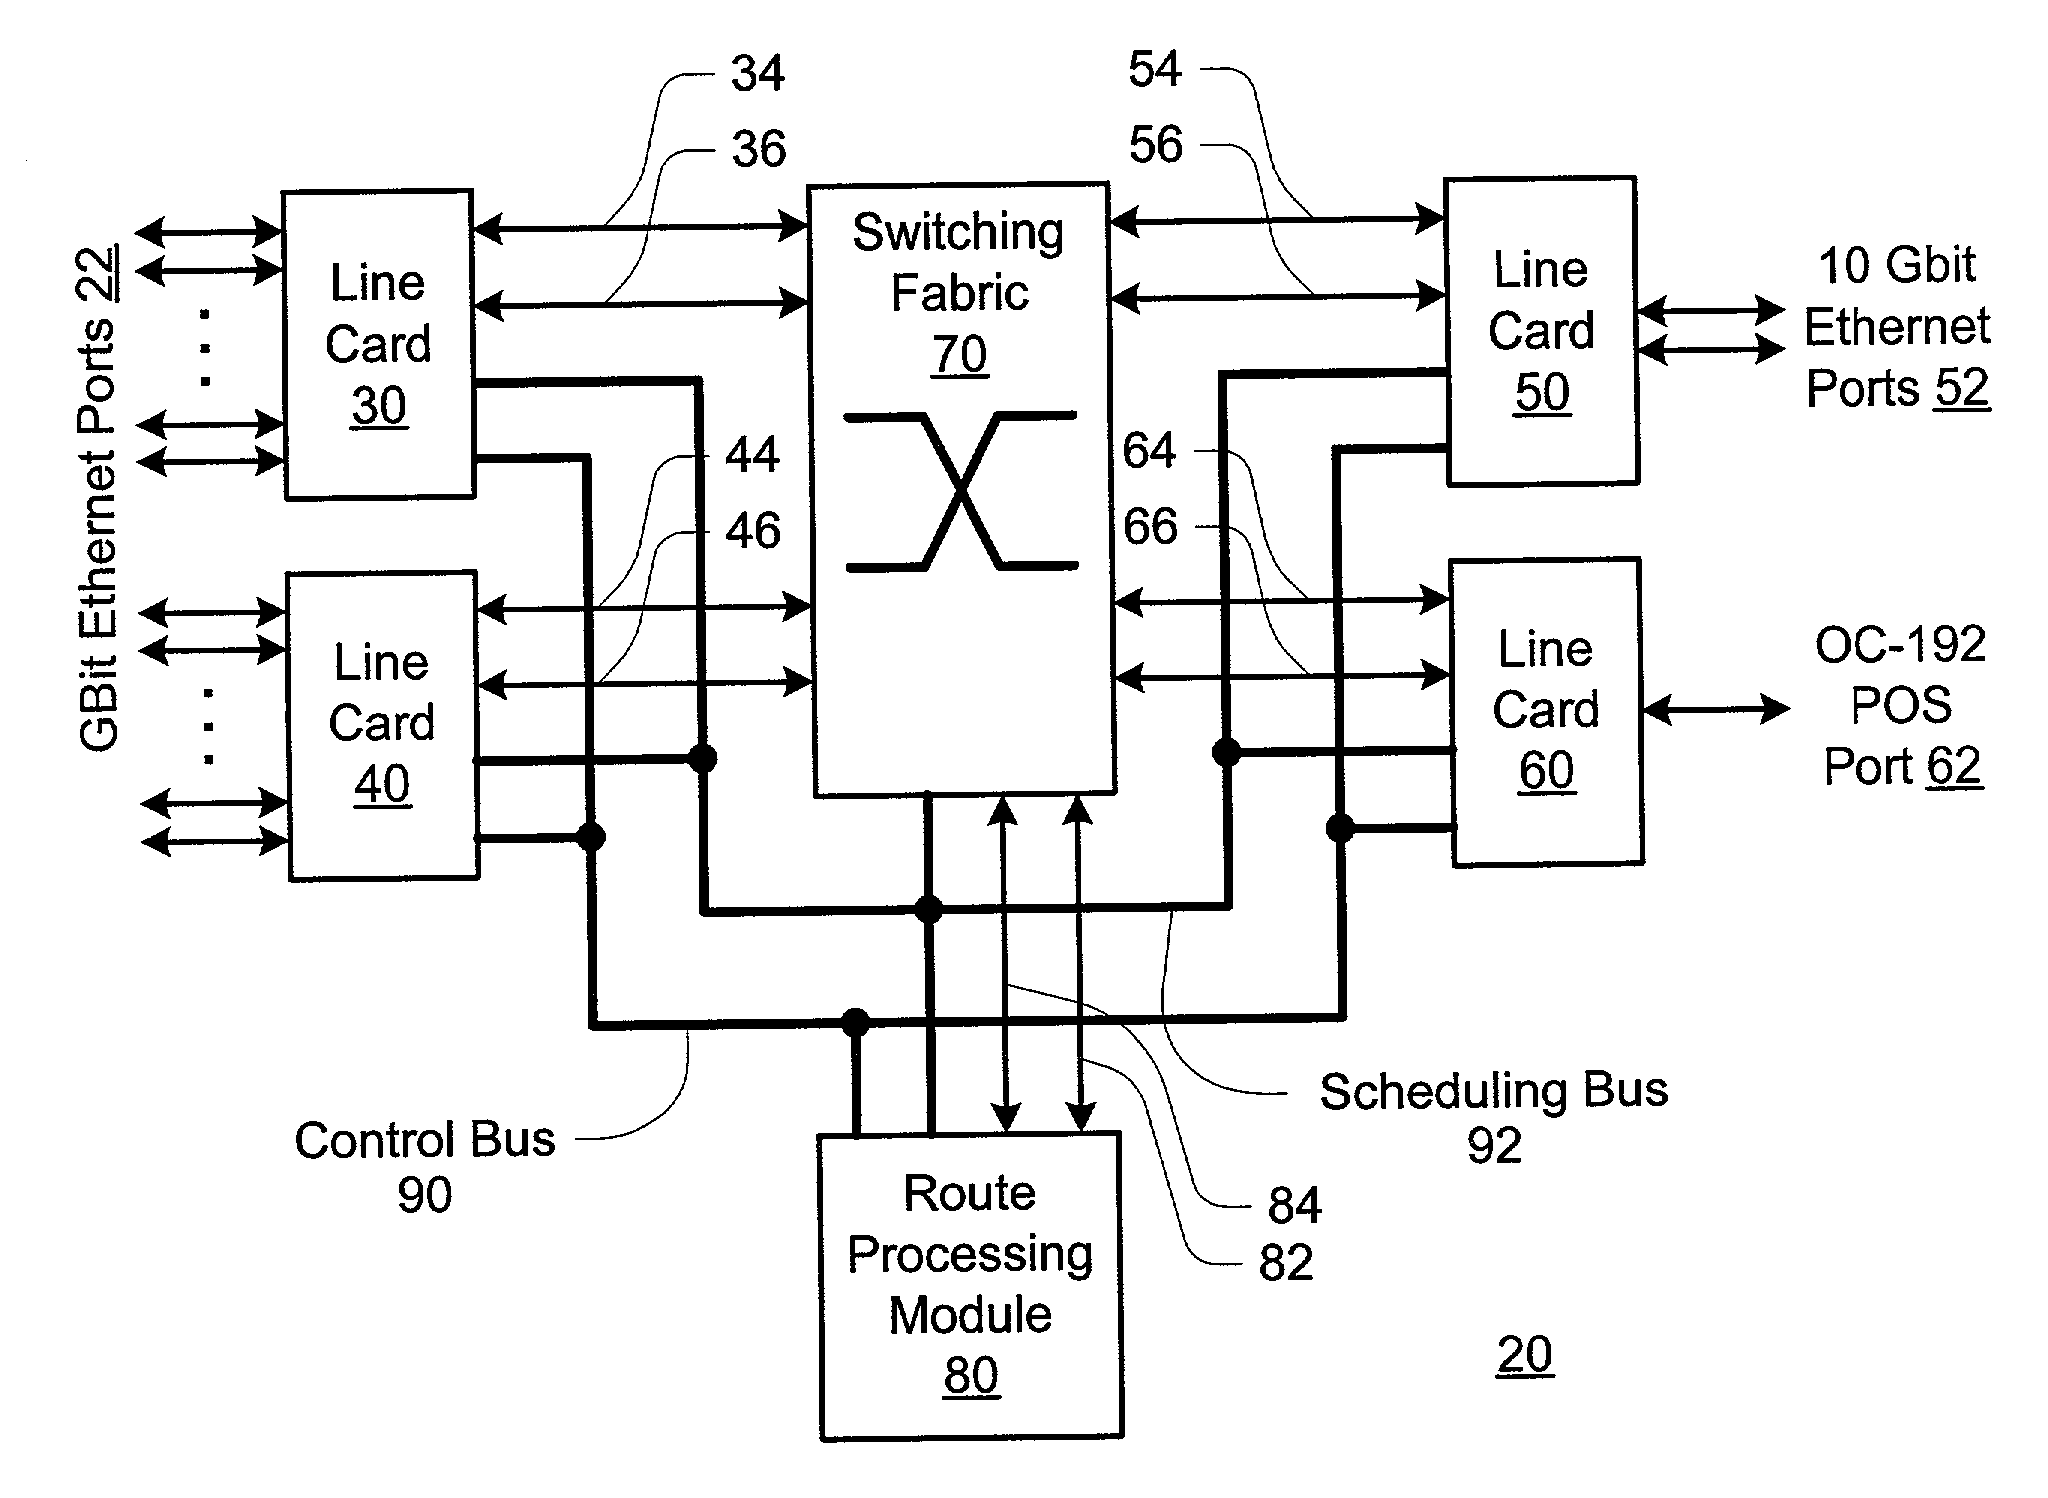 High-speed router with single backplane distributing both power and signaling